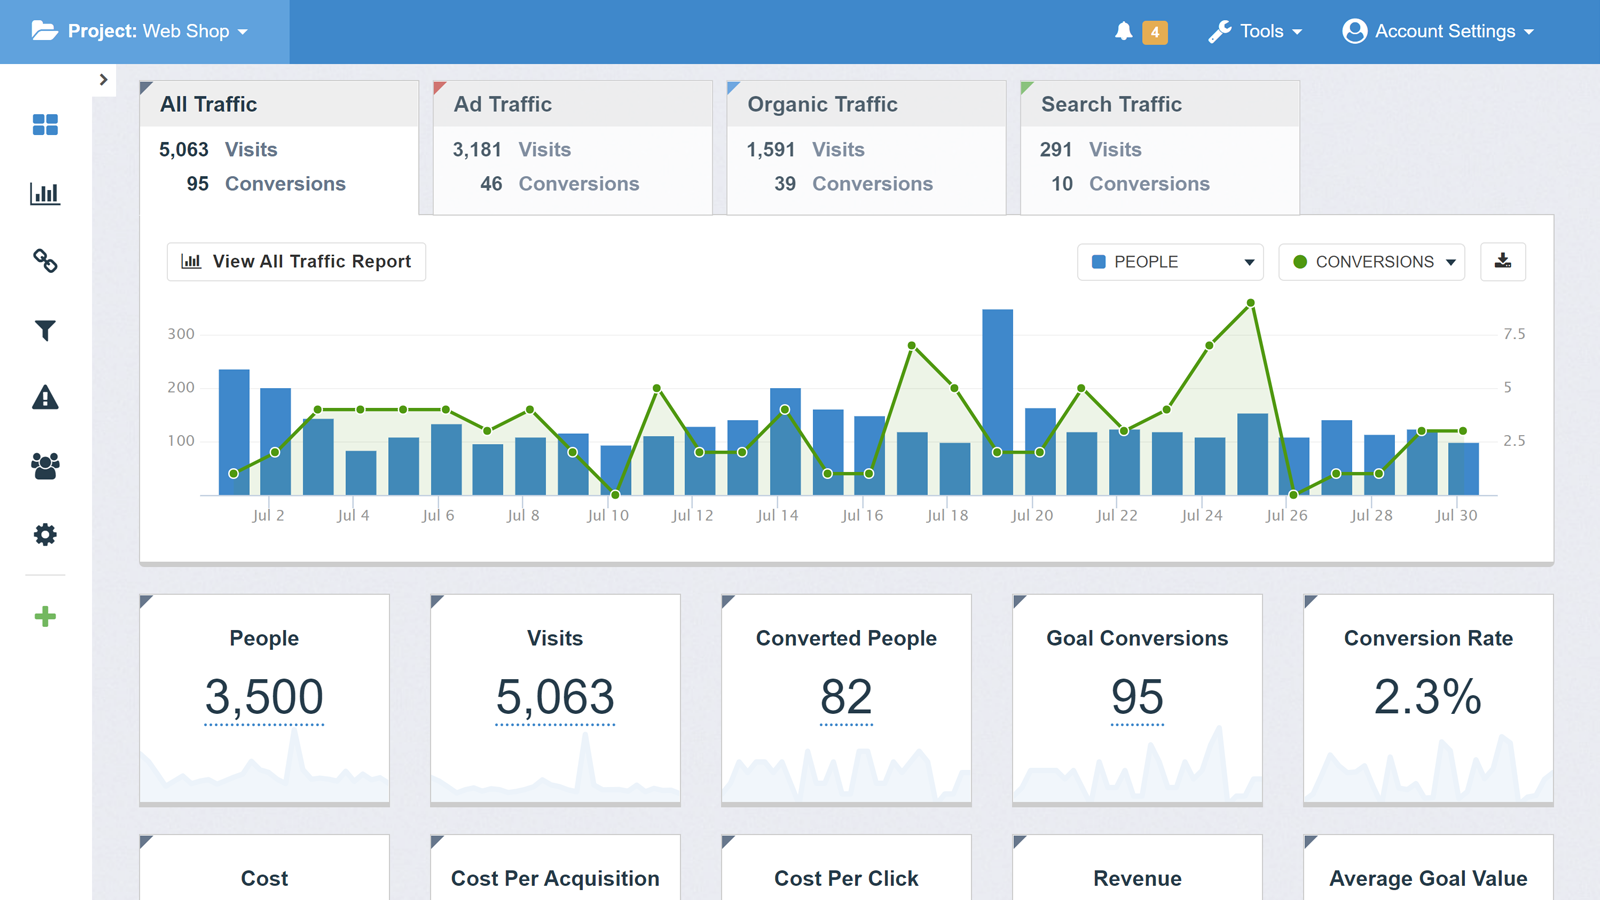 See all the key metrics for your online store in our dashboard